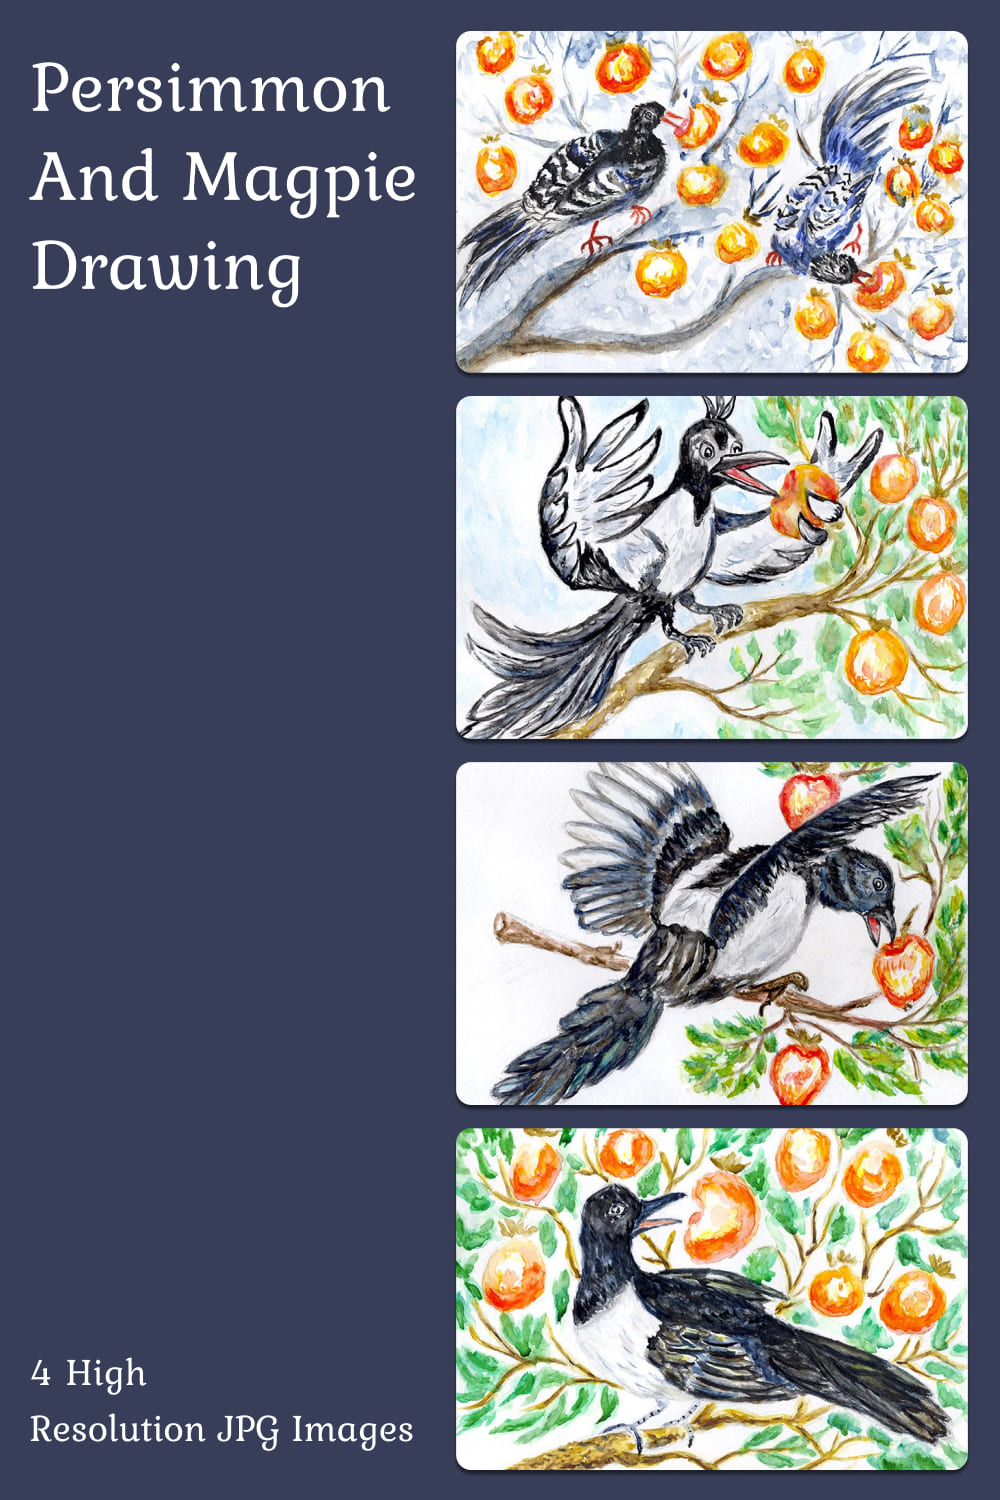 Persimmon and magpie drawing - pinterest image preview.